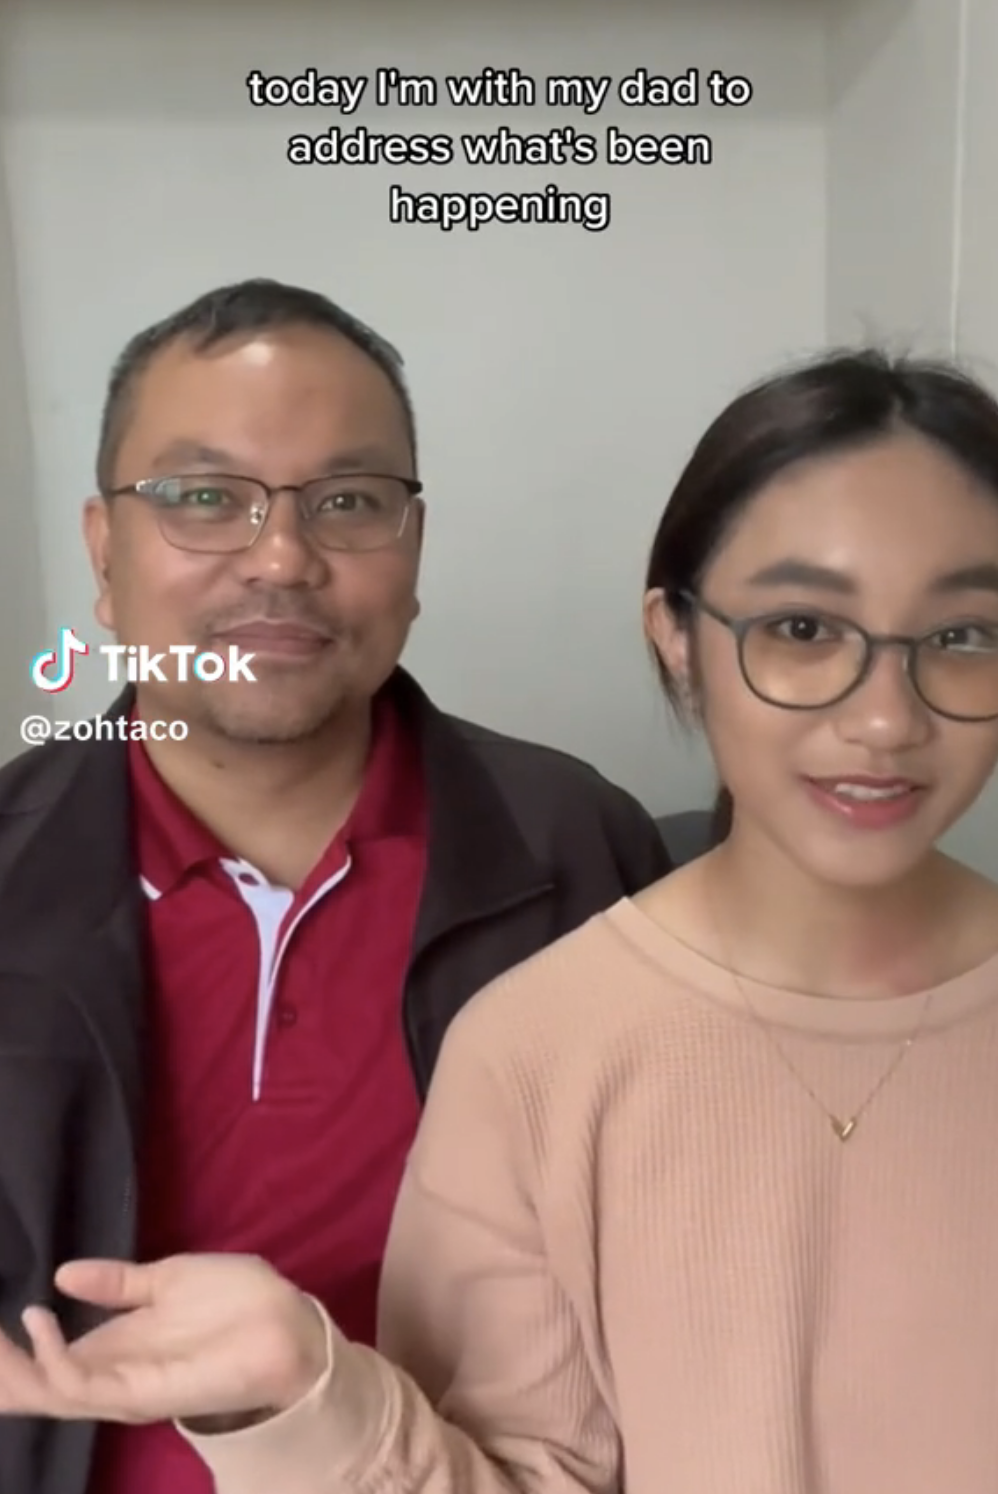 17-yr-old Zoe Gabriel meets with Charles & Keith co-founder after charming  the world with her brilliant response to online critics - The Online Citizen